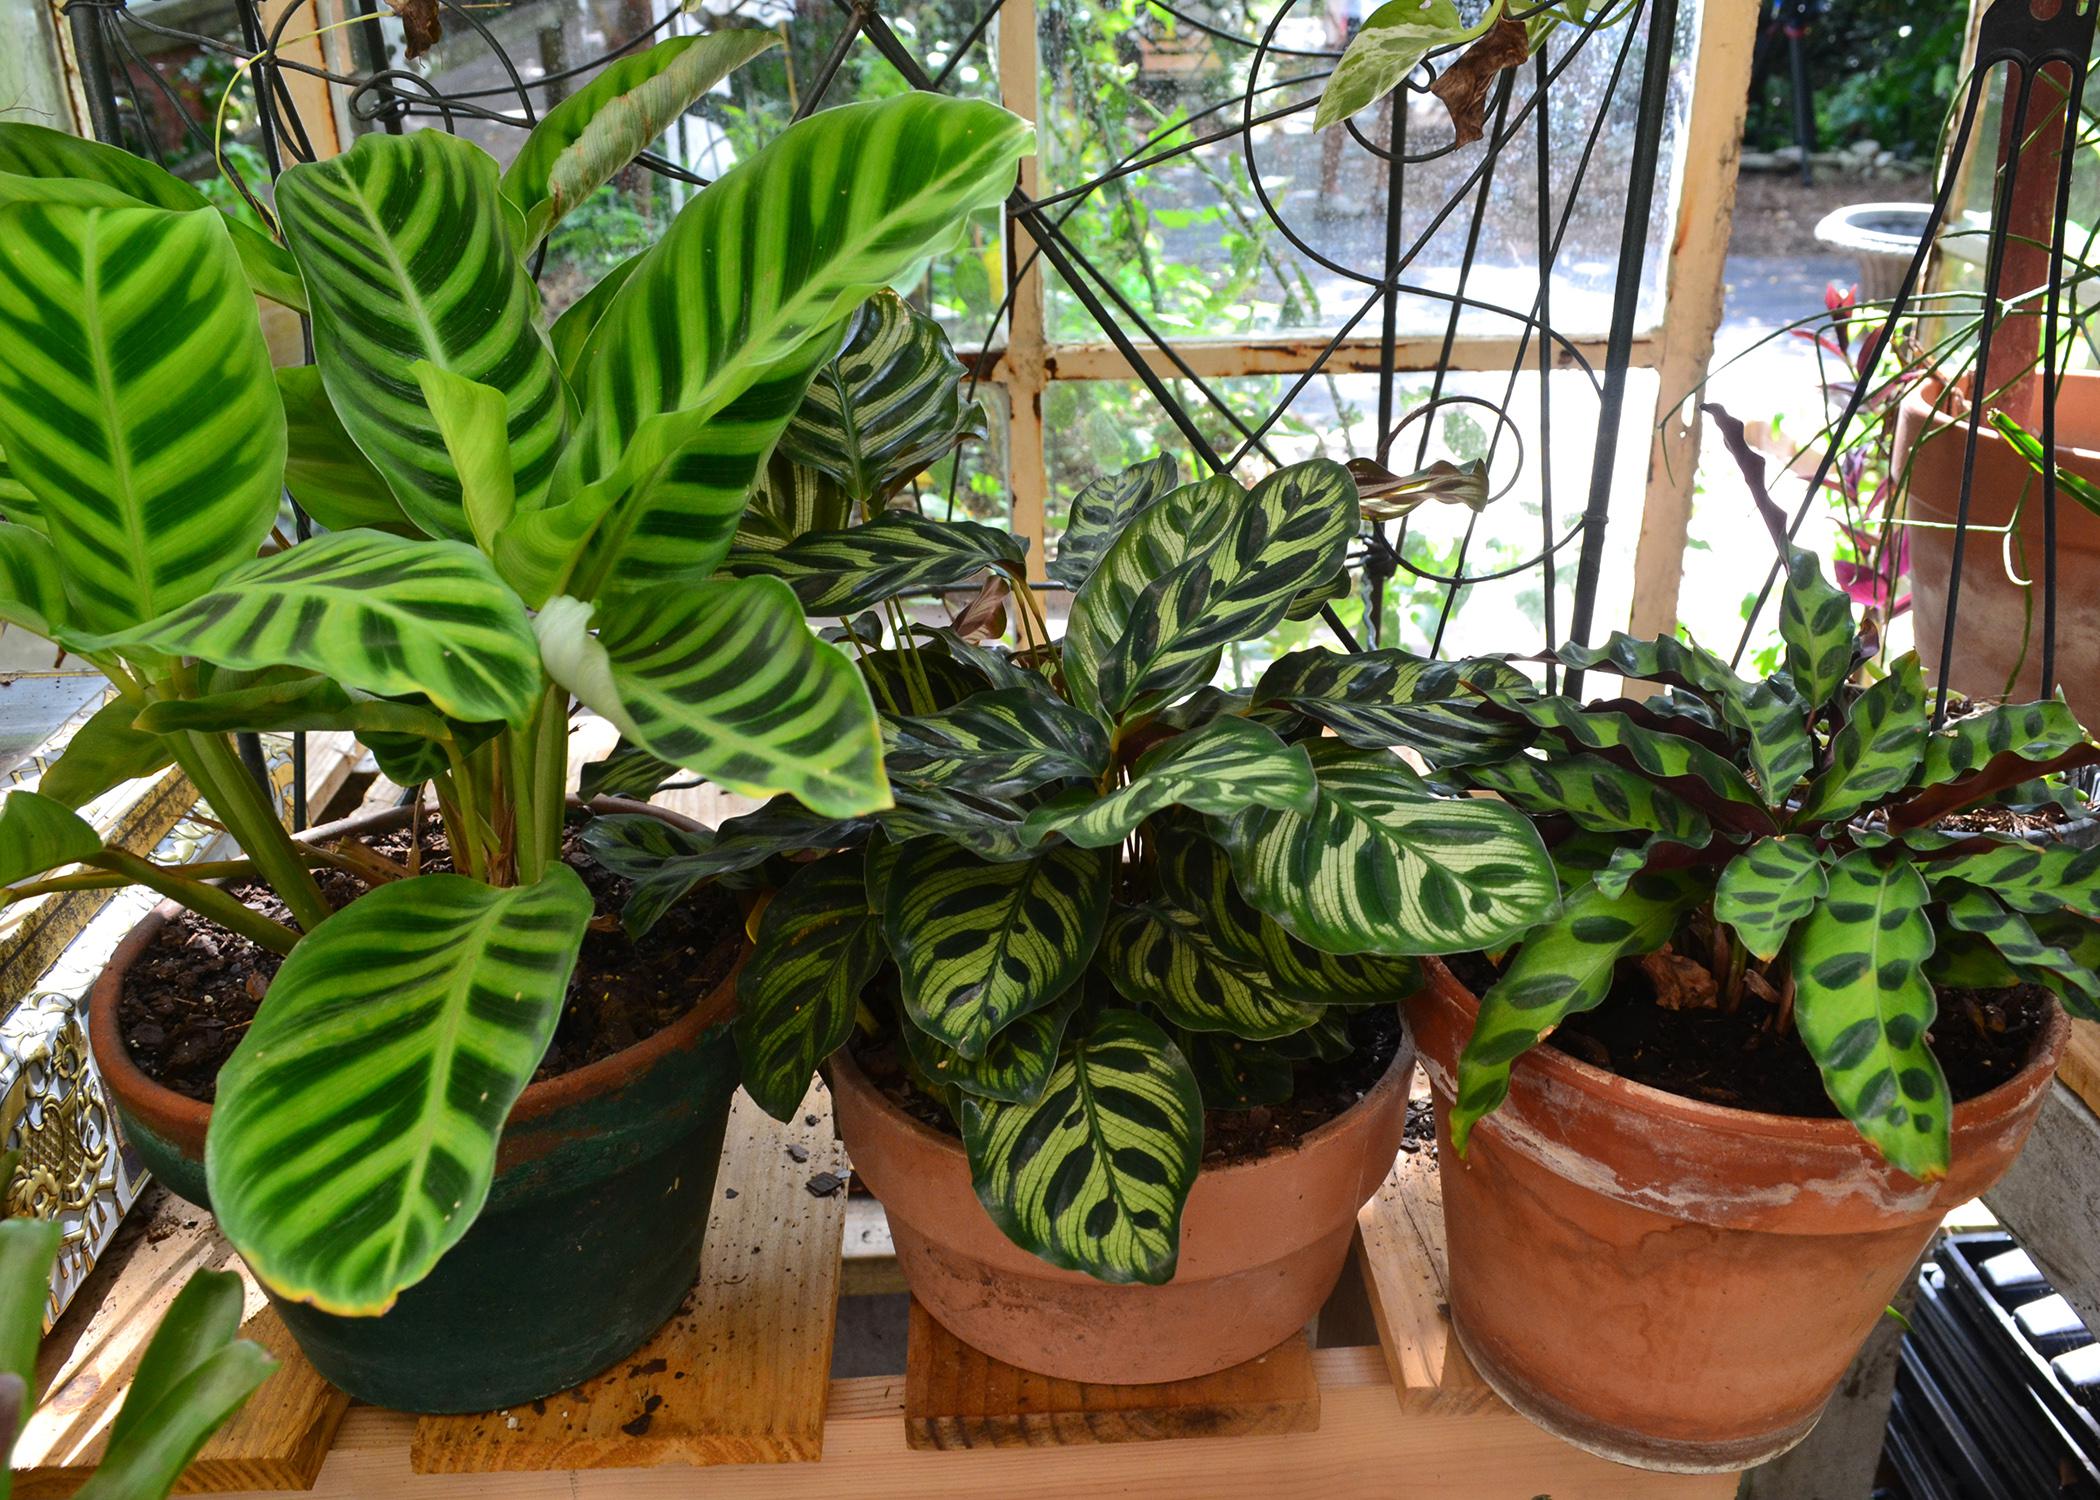 Three potted plants have green leaves with stripes or spots.